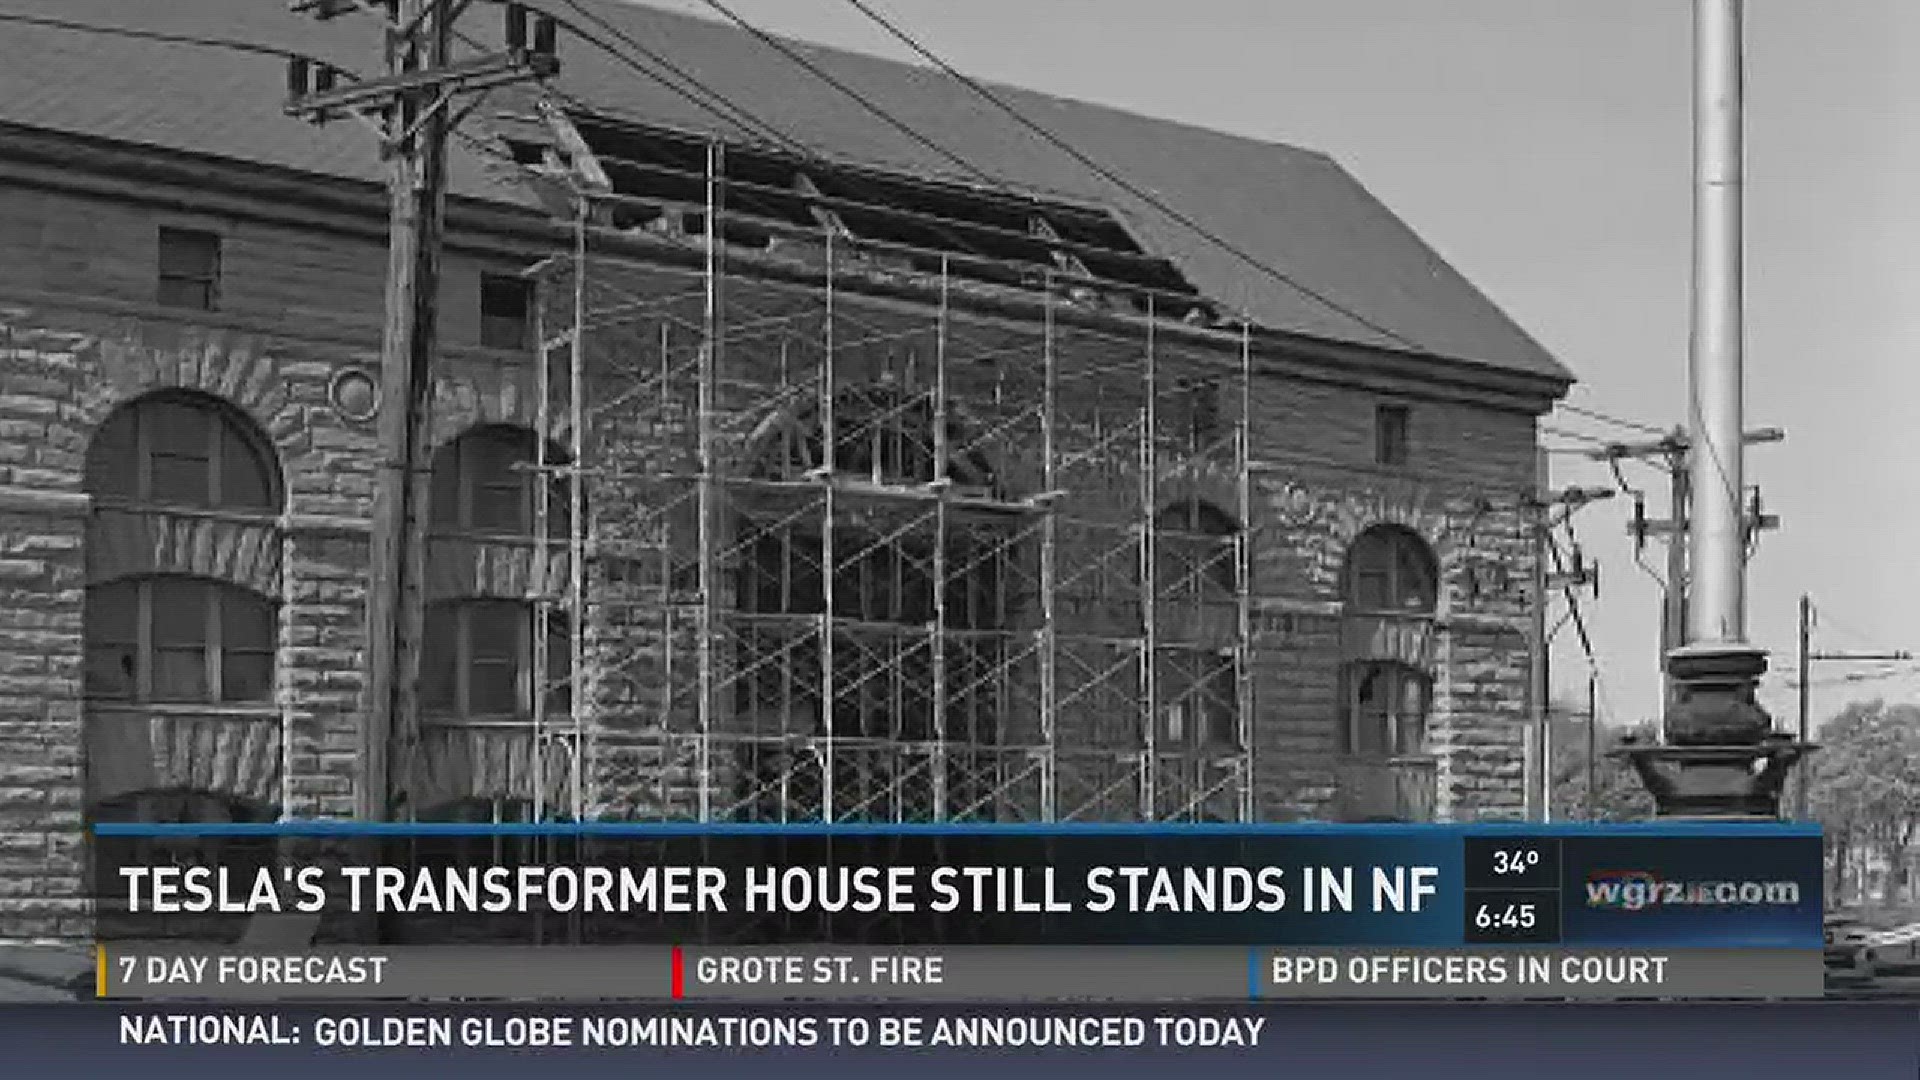 Unknown Stories of WNY: Tesla's Transformer House